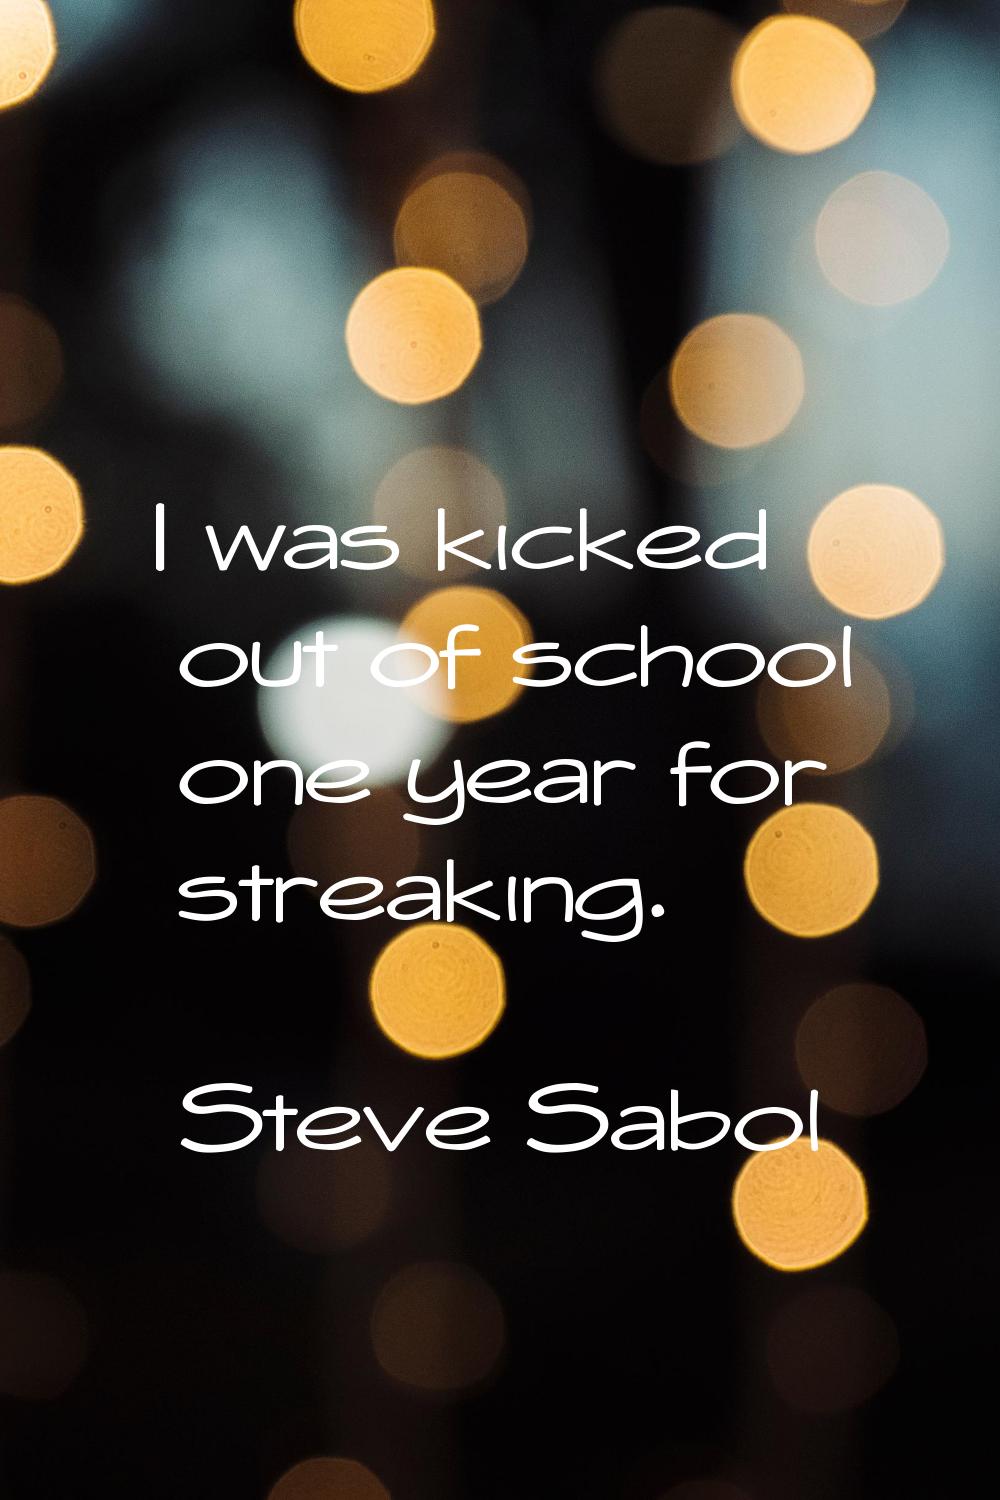 I was kicked out of school one year for streaking.